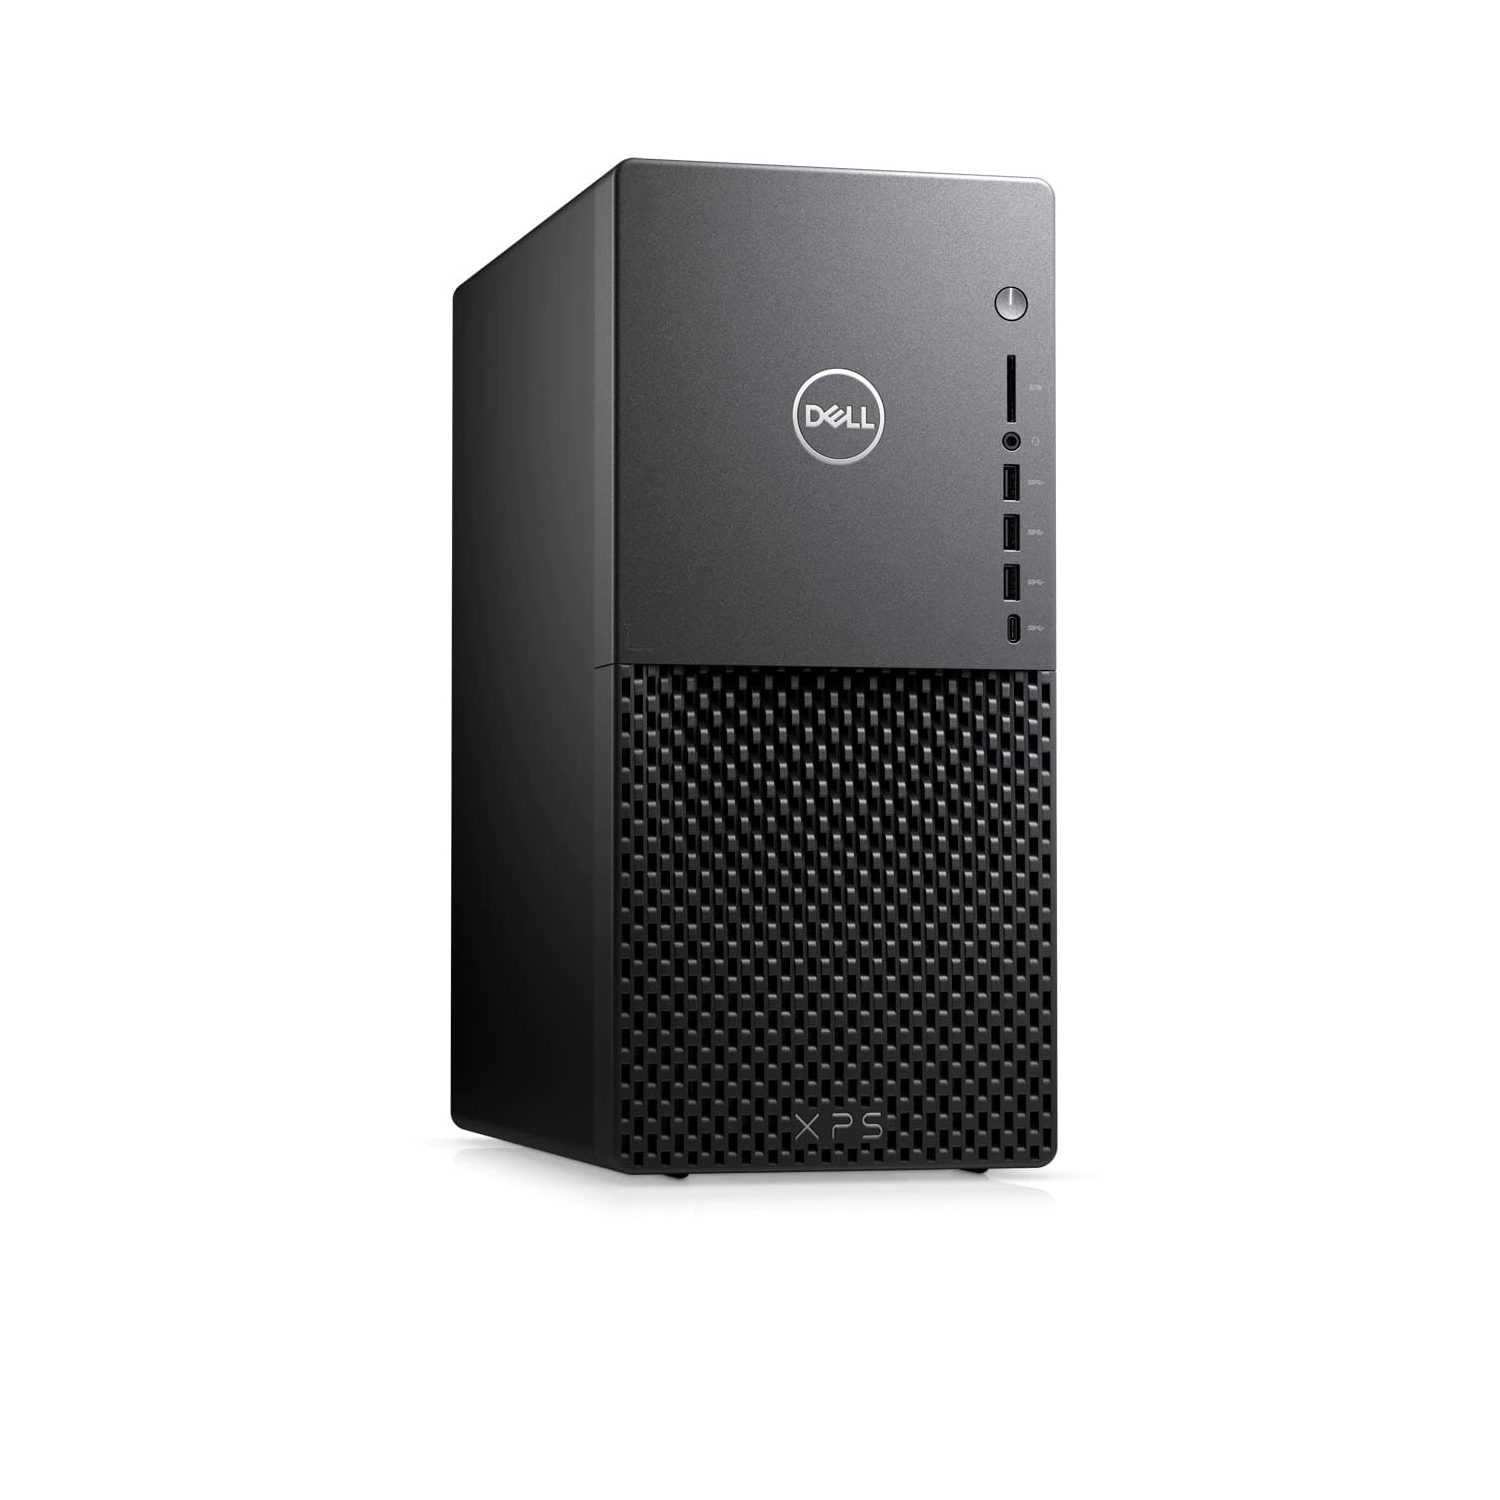 Refurbished (Excellent) - Dell XPS 8940 Desktop (2020) | Core i5 - 512GB SSD - 16GB RAM | 6 Cores @ 4.4 GHz - 11th Gen CPU Certified Refurbished